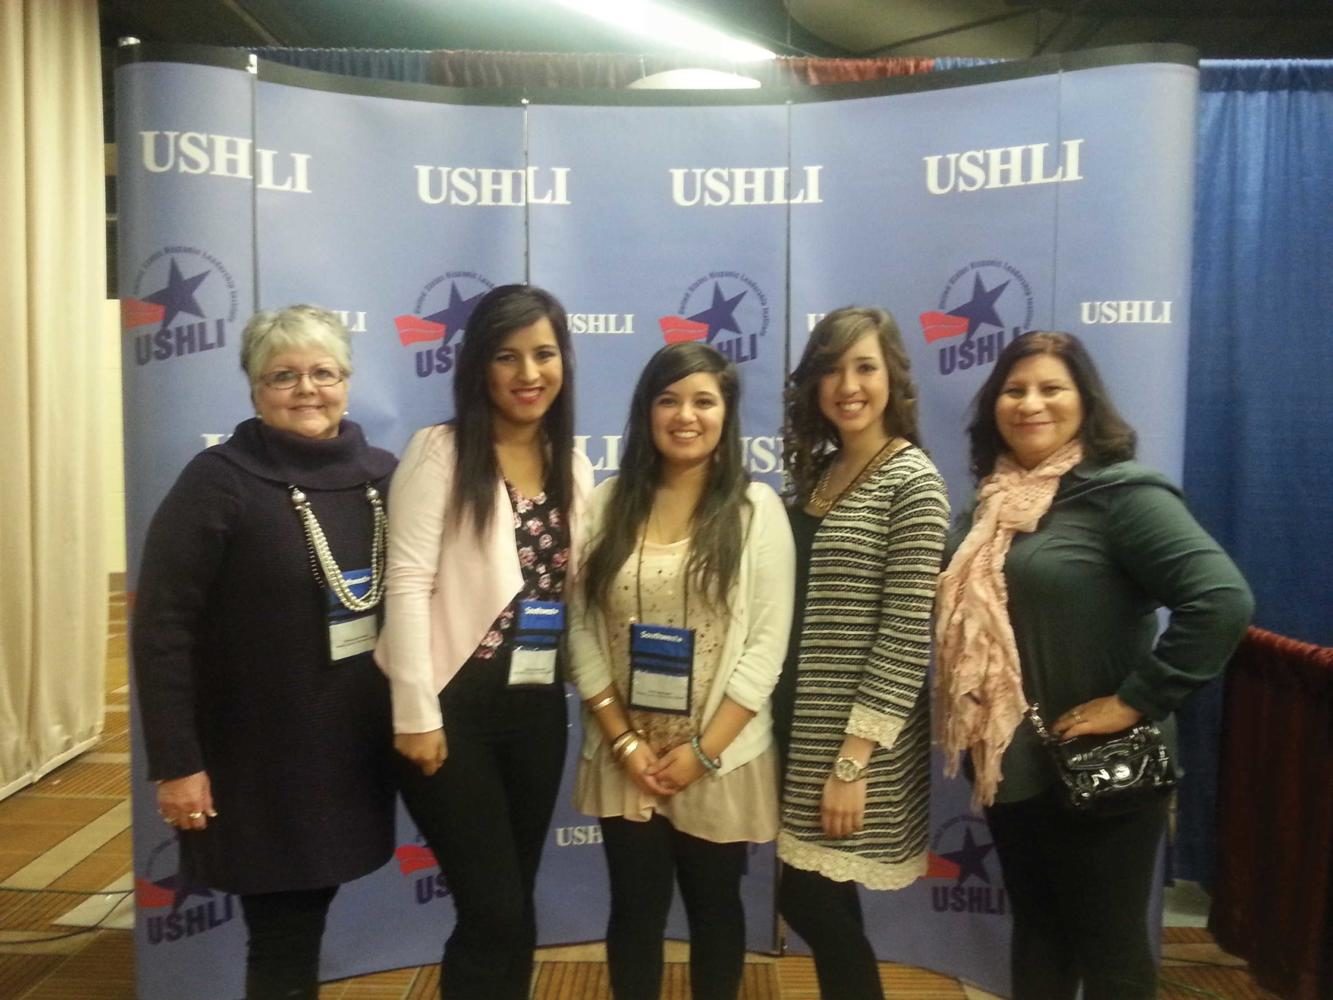 Previous HALO members at the United States Hispanic Leadership Institute in Chicago, Illinois. (Crusader file photo)